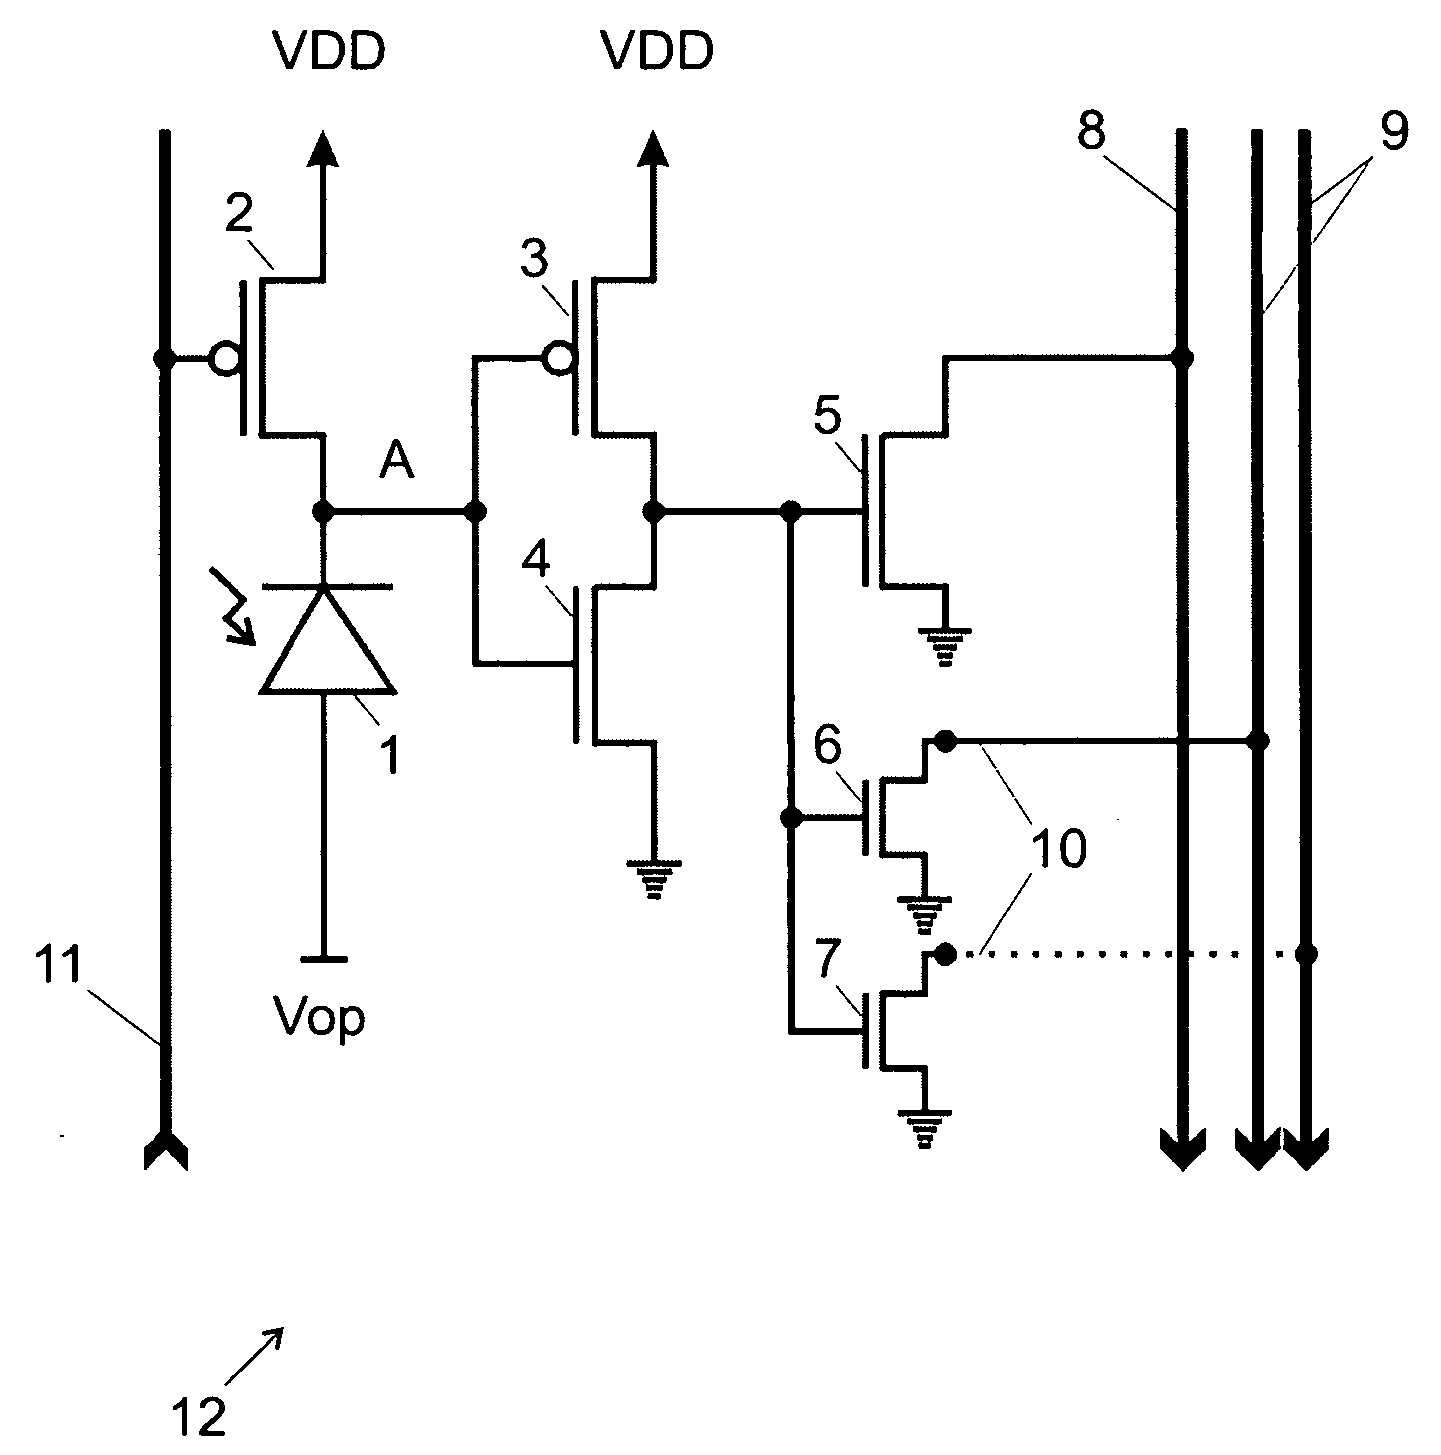 Integrated circuit comprising an array of single photon avalanche diodes